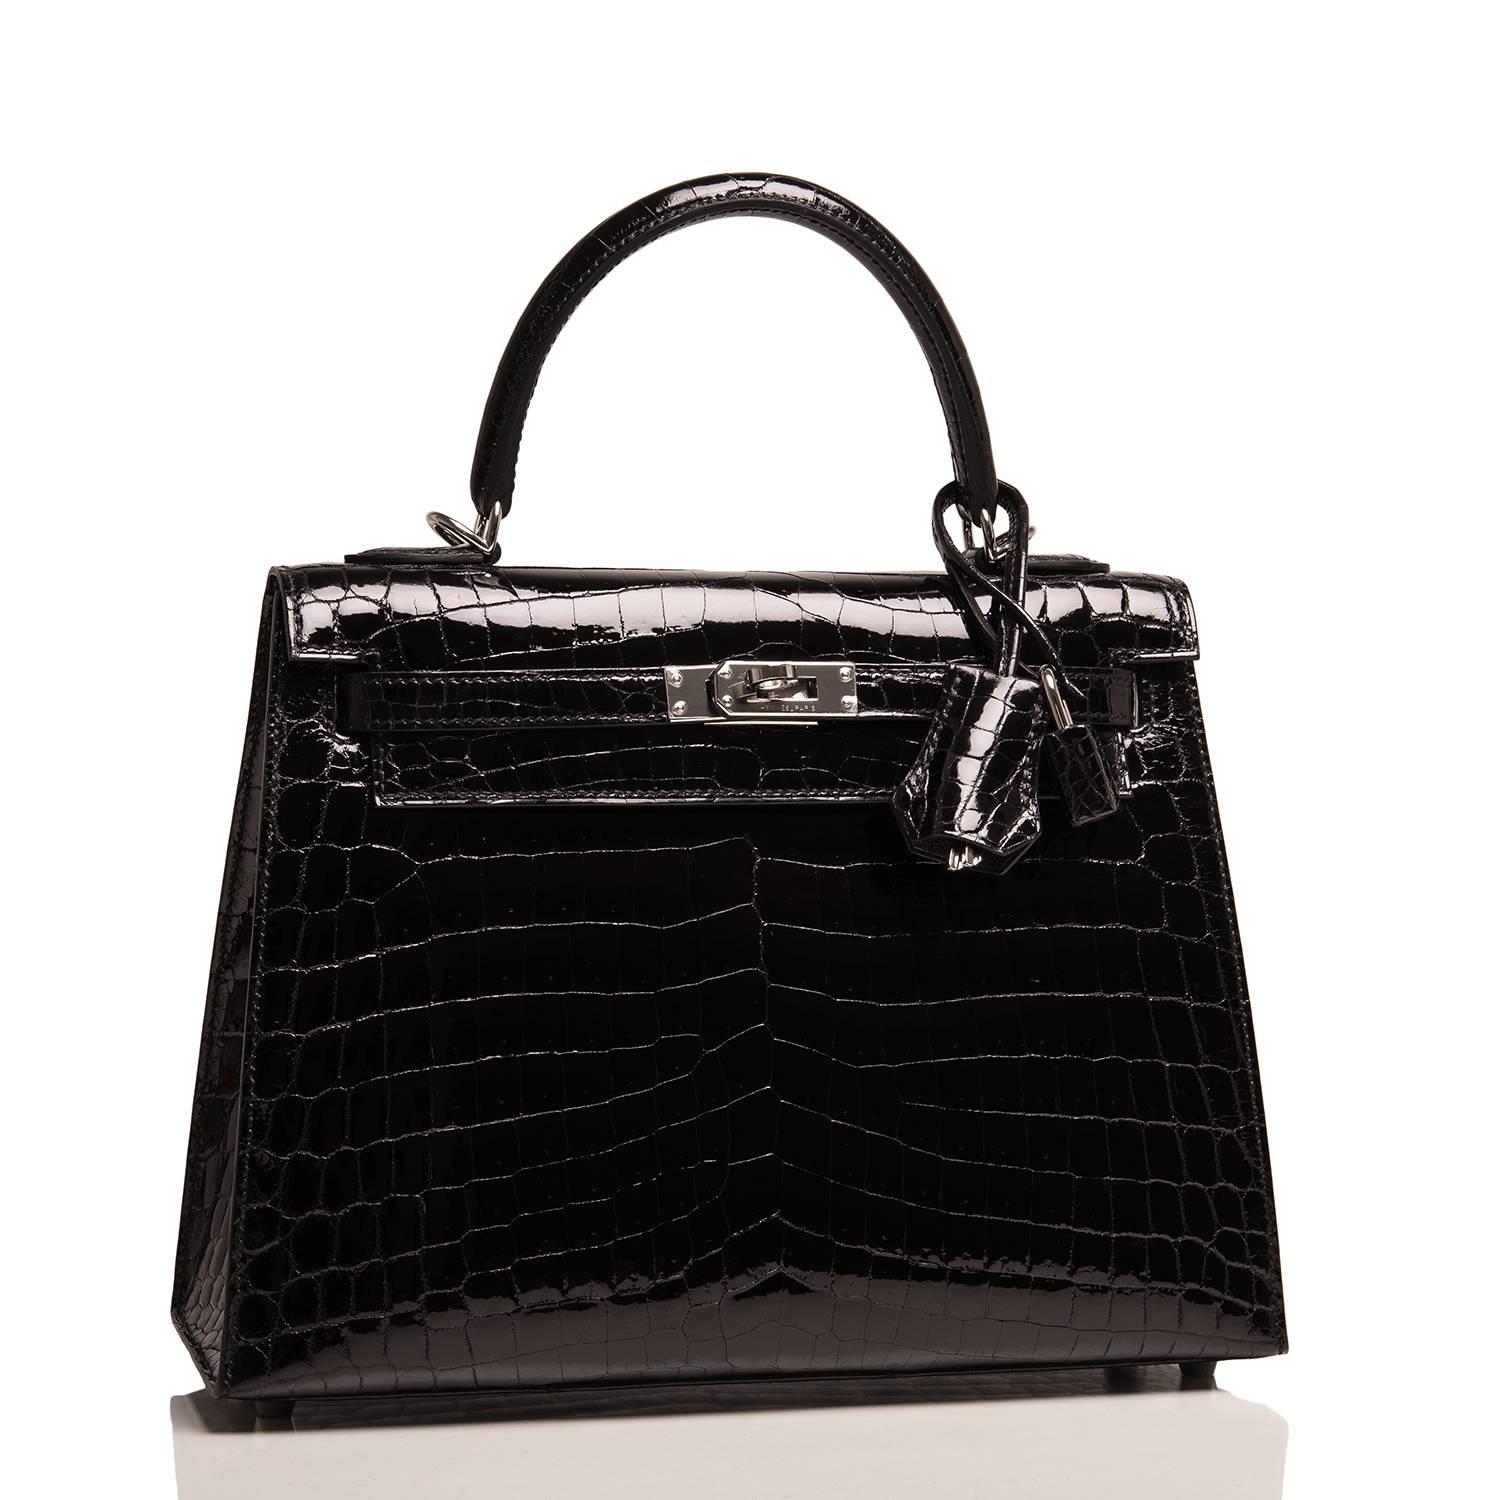 Hermes Black Shiny Niloticus Crocodile Kelly Sellier 25cm with palladium hardware.

This Kelly features tonal stitching, a front toggle closure, a clochette with lock and two keys and a single rolled handle.

The interior is lined with Black